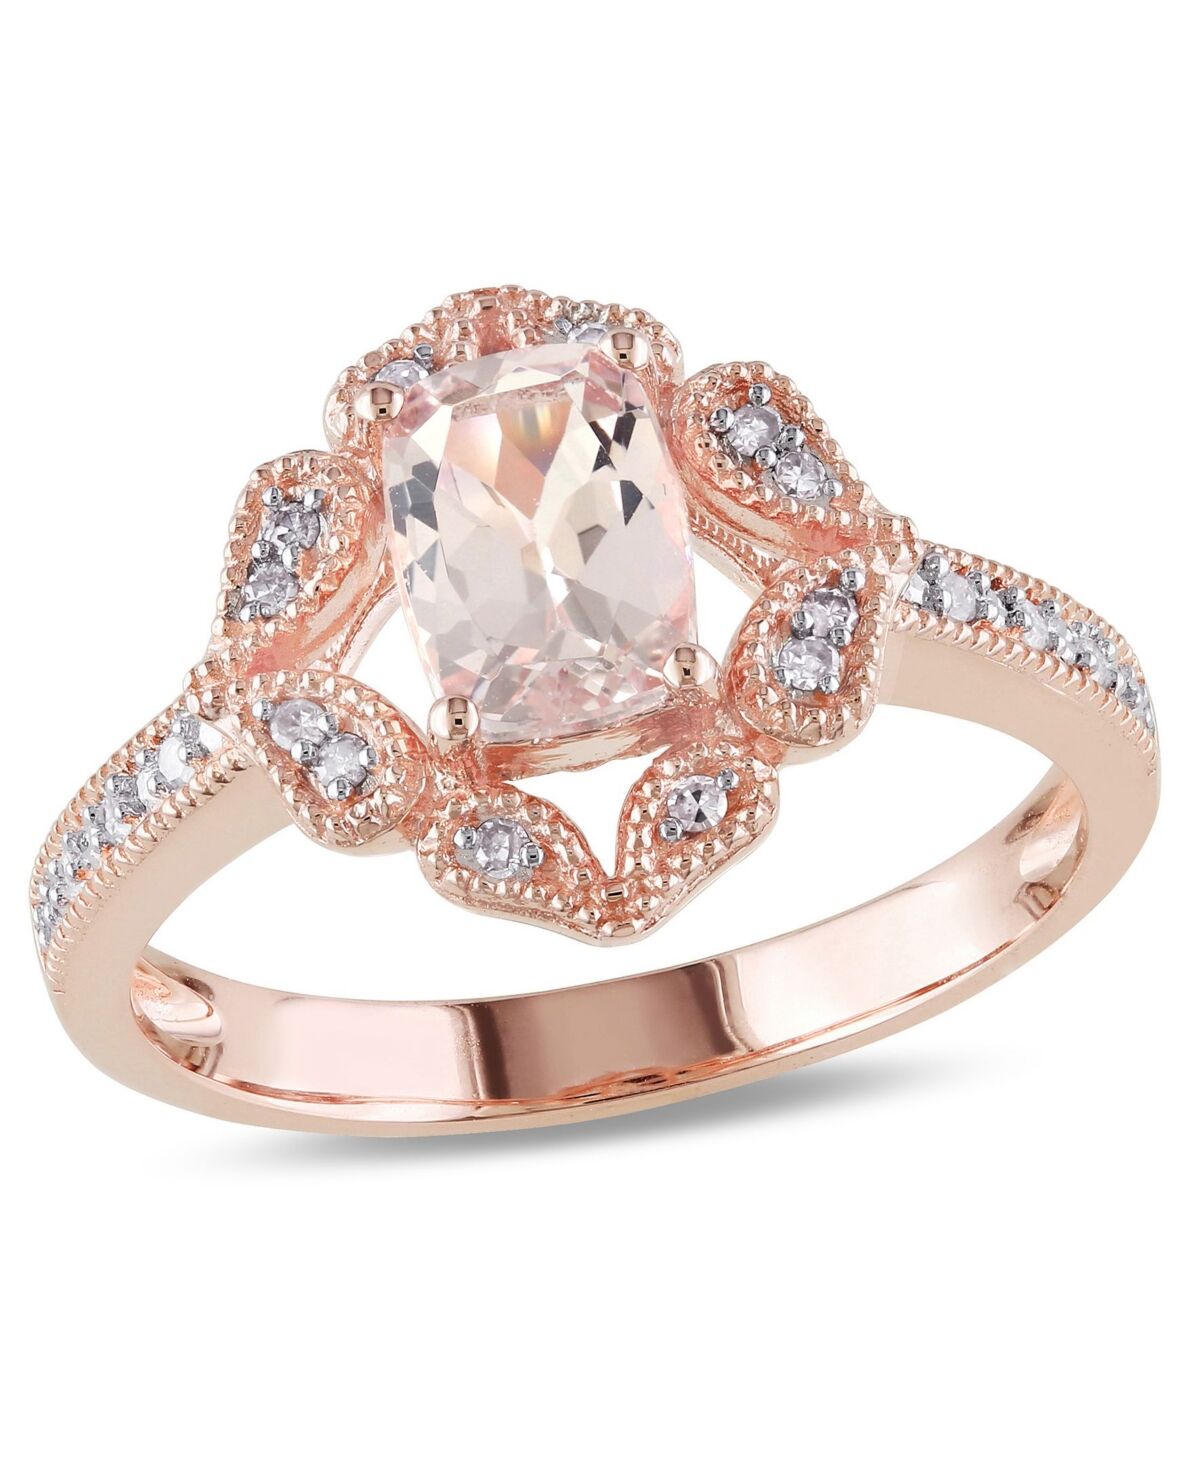 Macy's Morganite and Diamond Vintage-inspired Floral Halo Ring - Pink